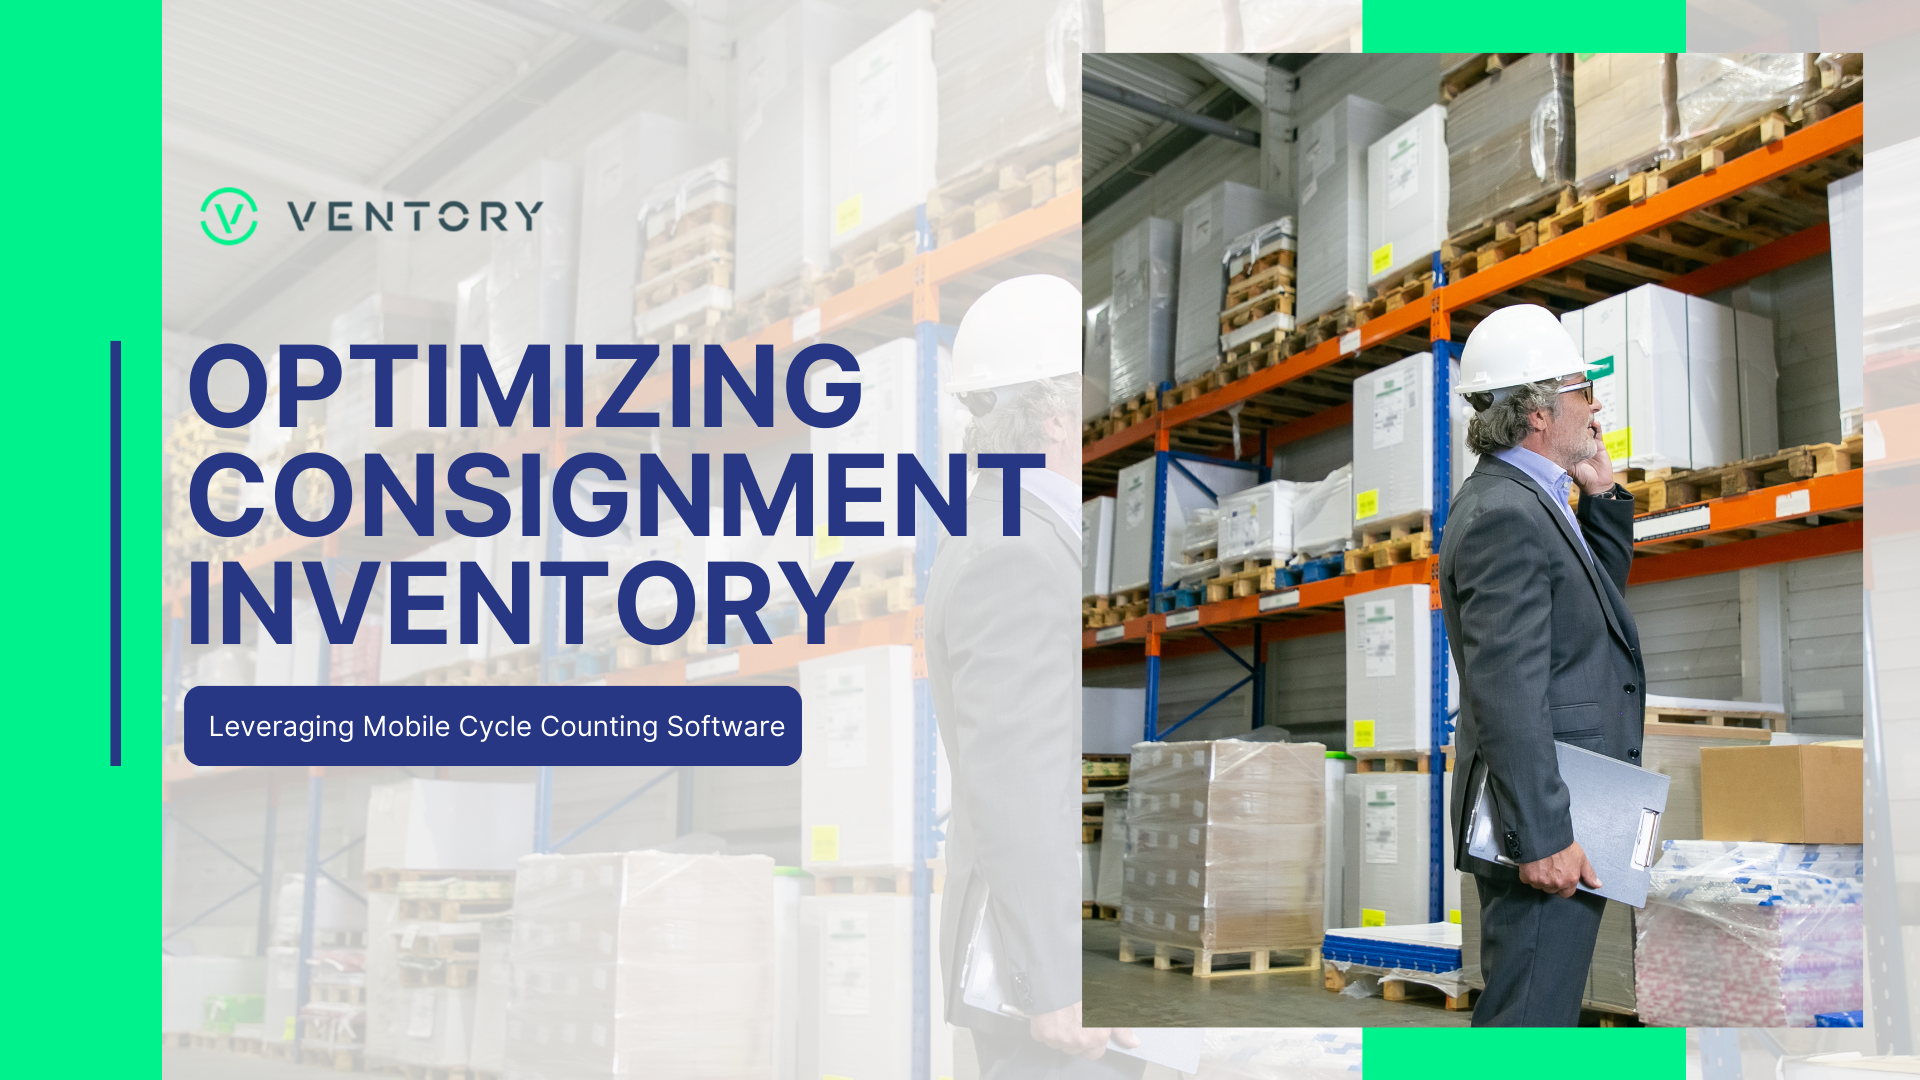 Consignment Inventory